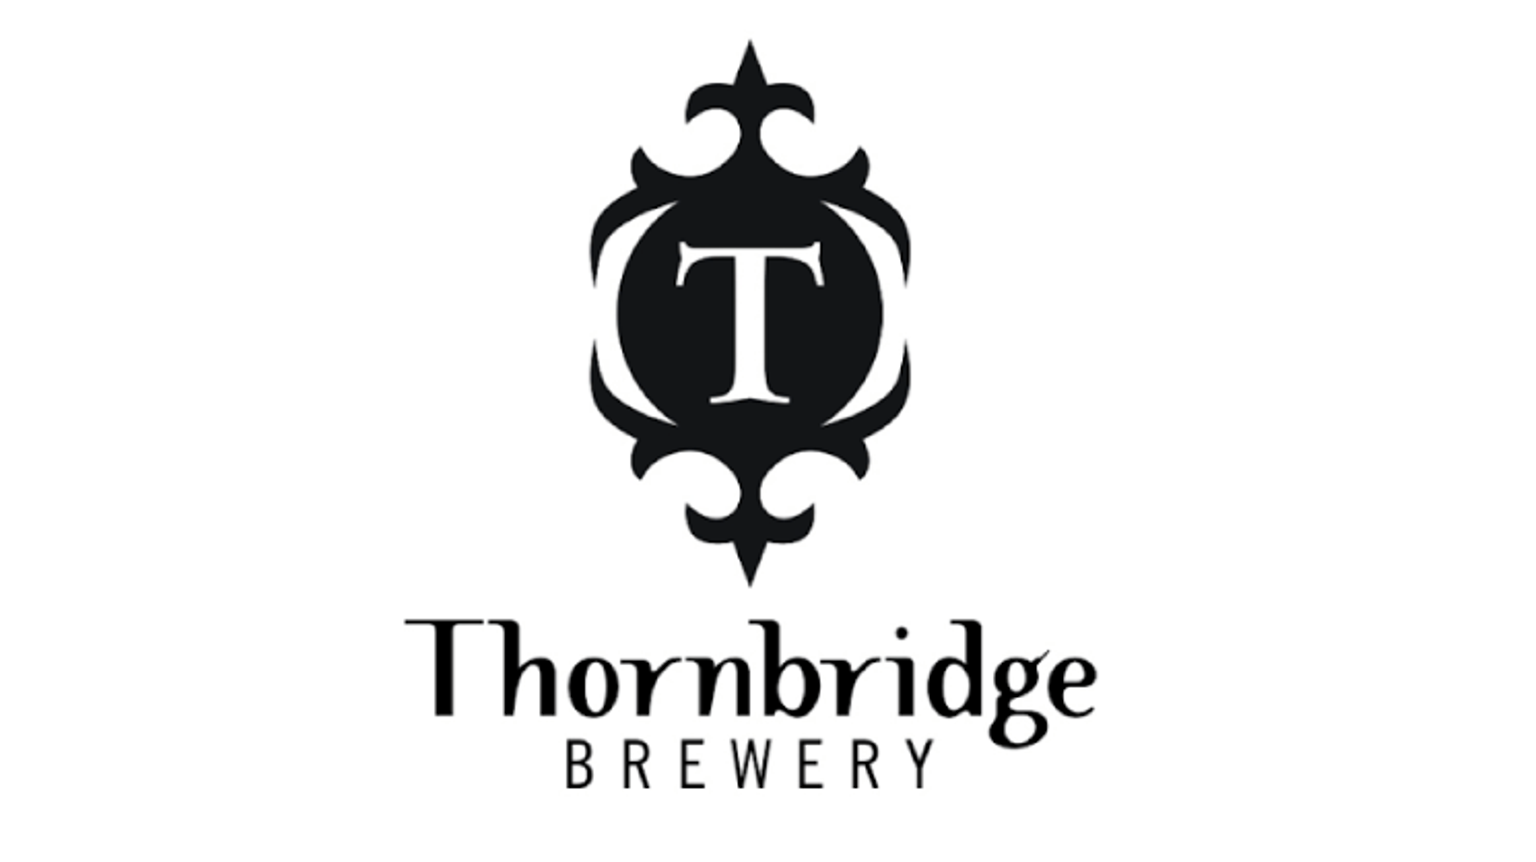 thumbnail for blog article named: Thornbridge - 13 years of Innovation, Passion, Knowledge